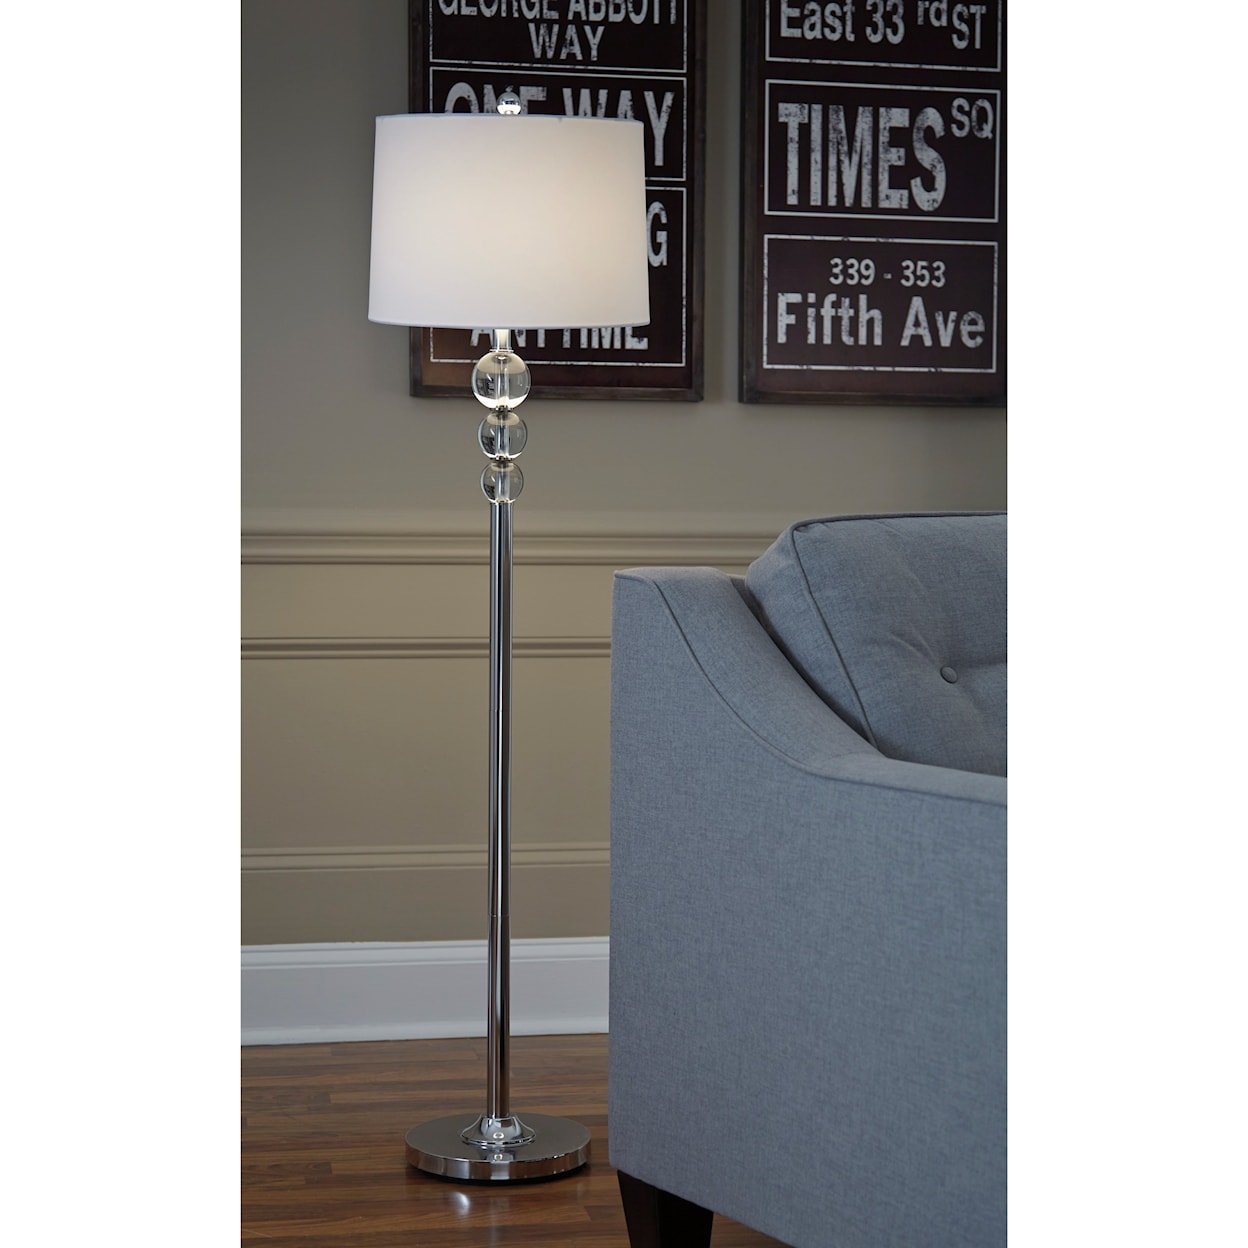 Signature Design by Ashley Lamps - Contemporary Joaquin Chrome Finish Crystal Floor Lamp